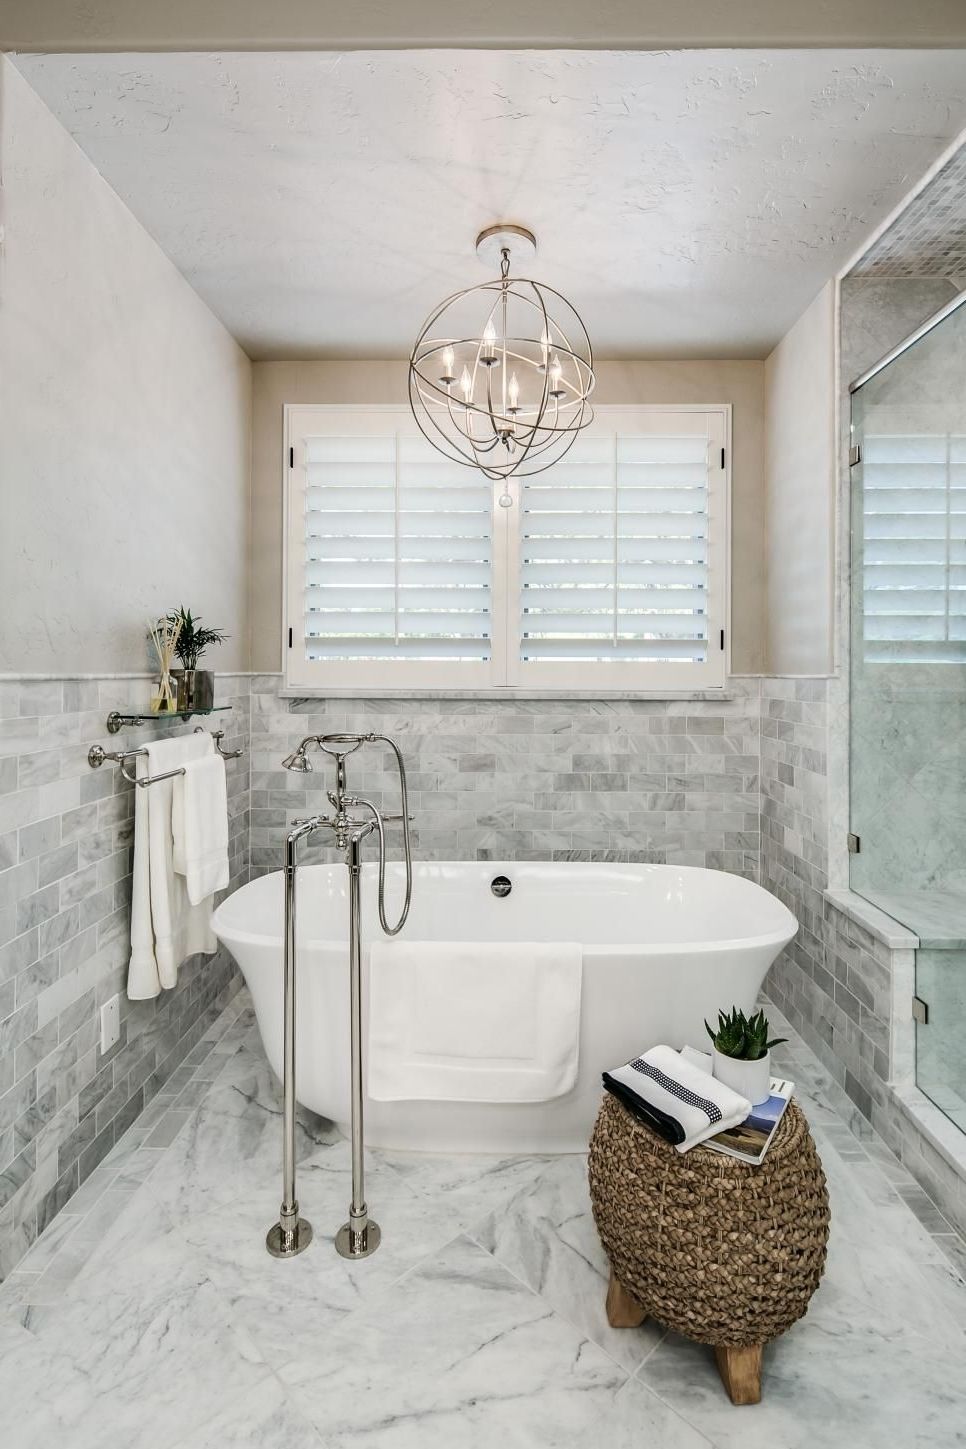 Most Recent Bathroom Chandeliers Regarding A Metal Orb Chandelier Is Centered Above The Freestanding Tub In (View 1 of 15)